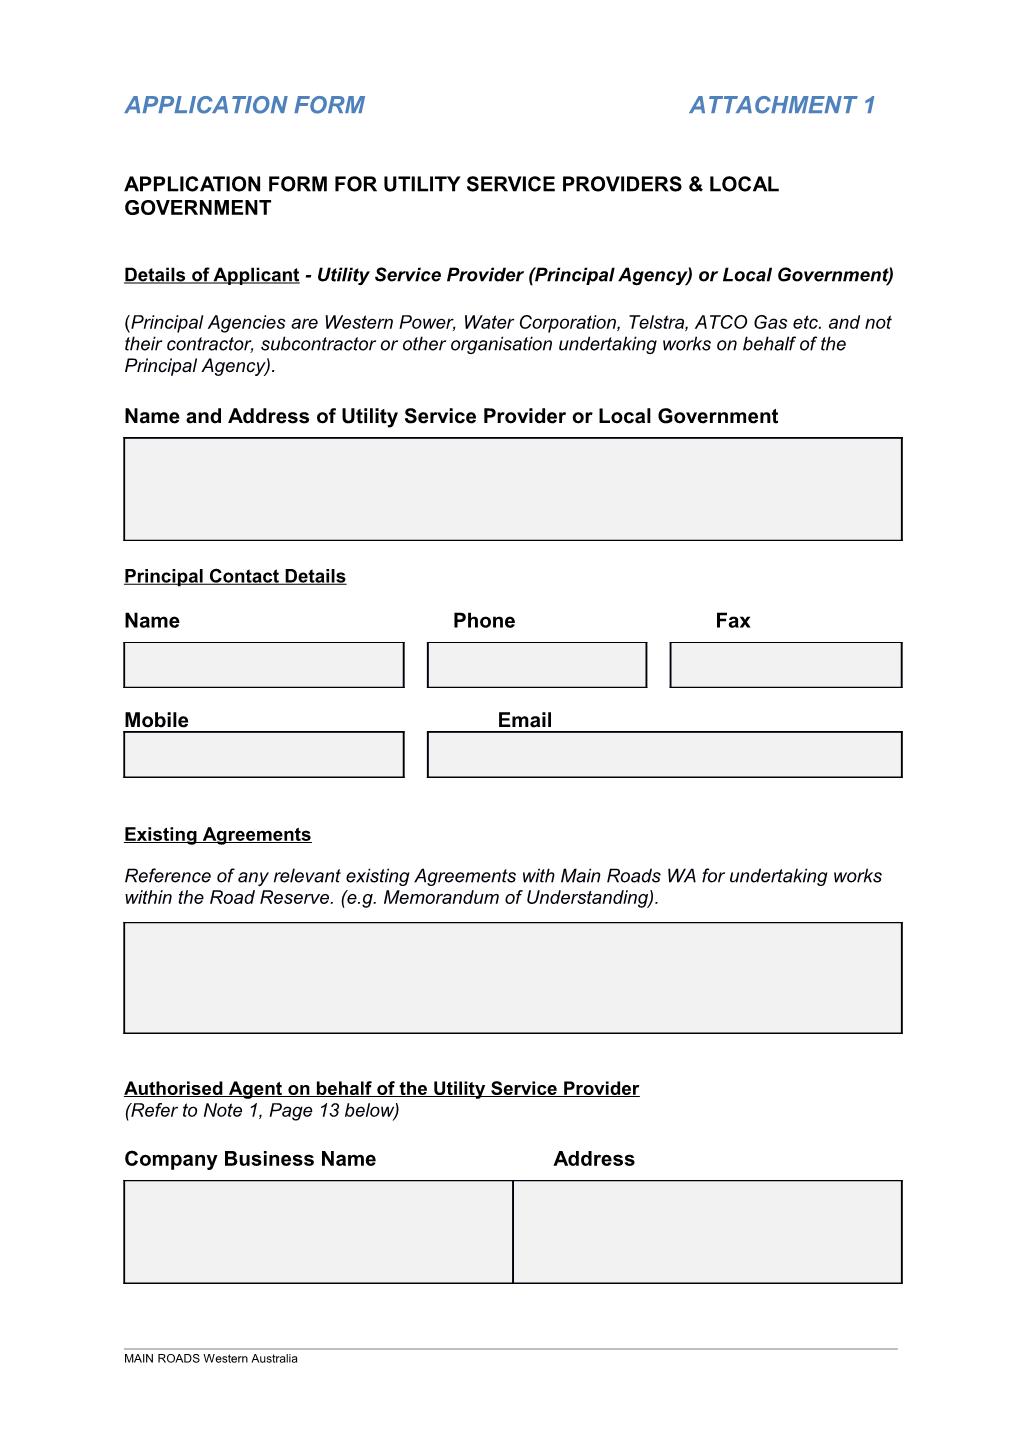 Application Form for Utility Service Providers & Local Government